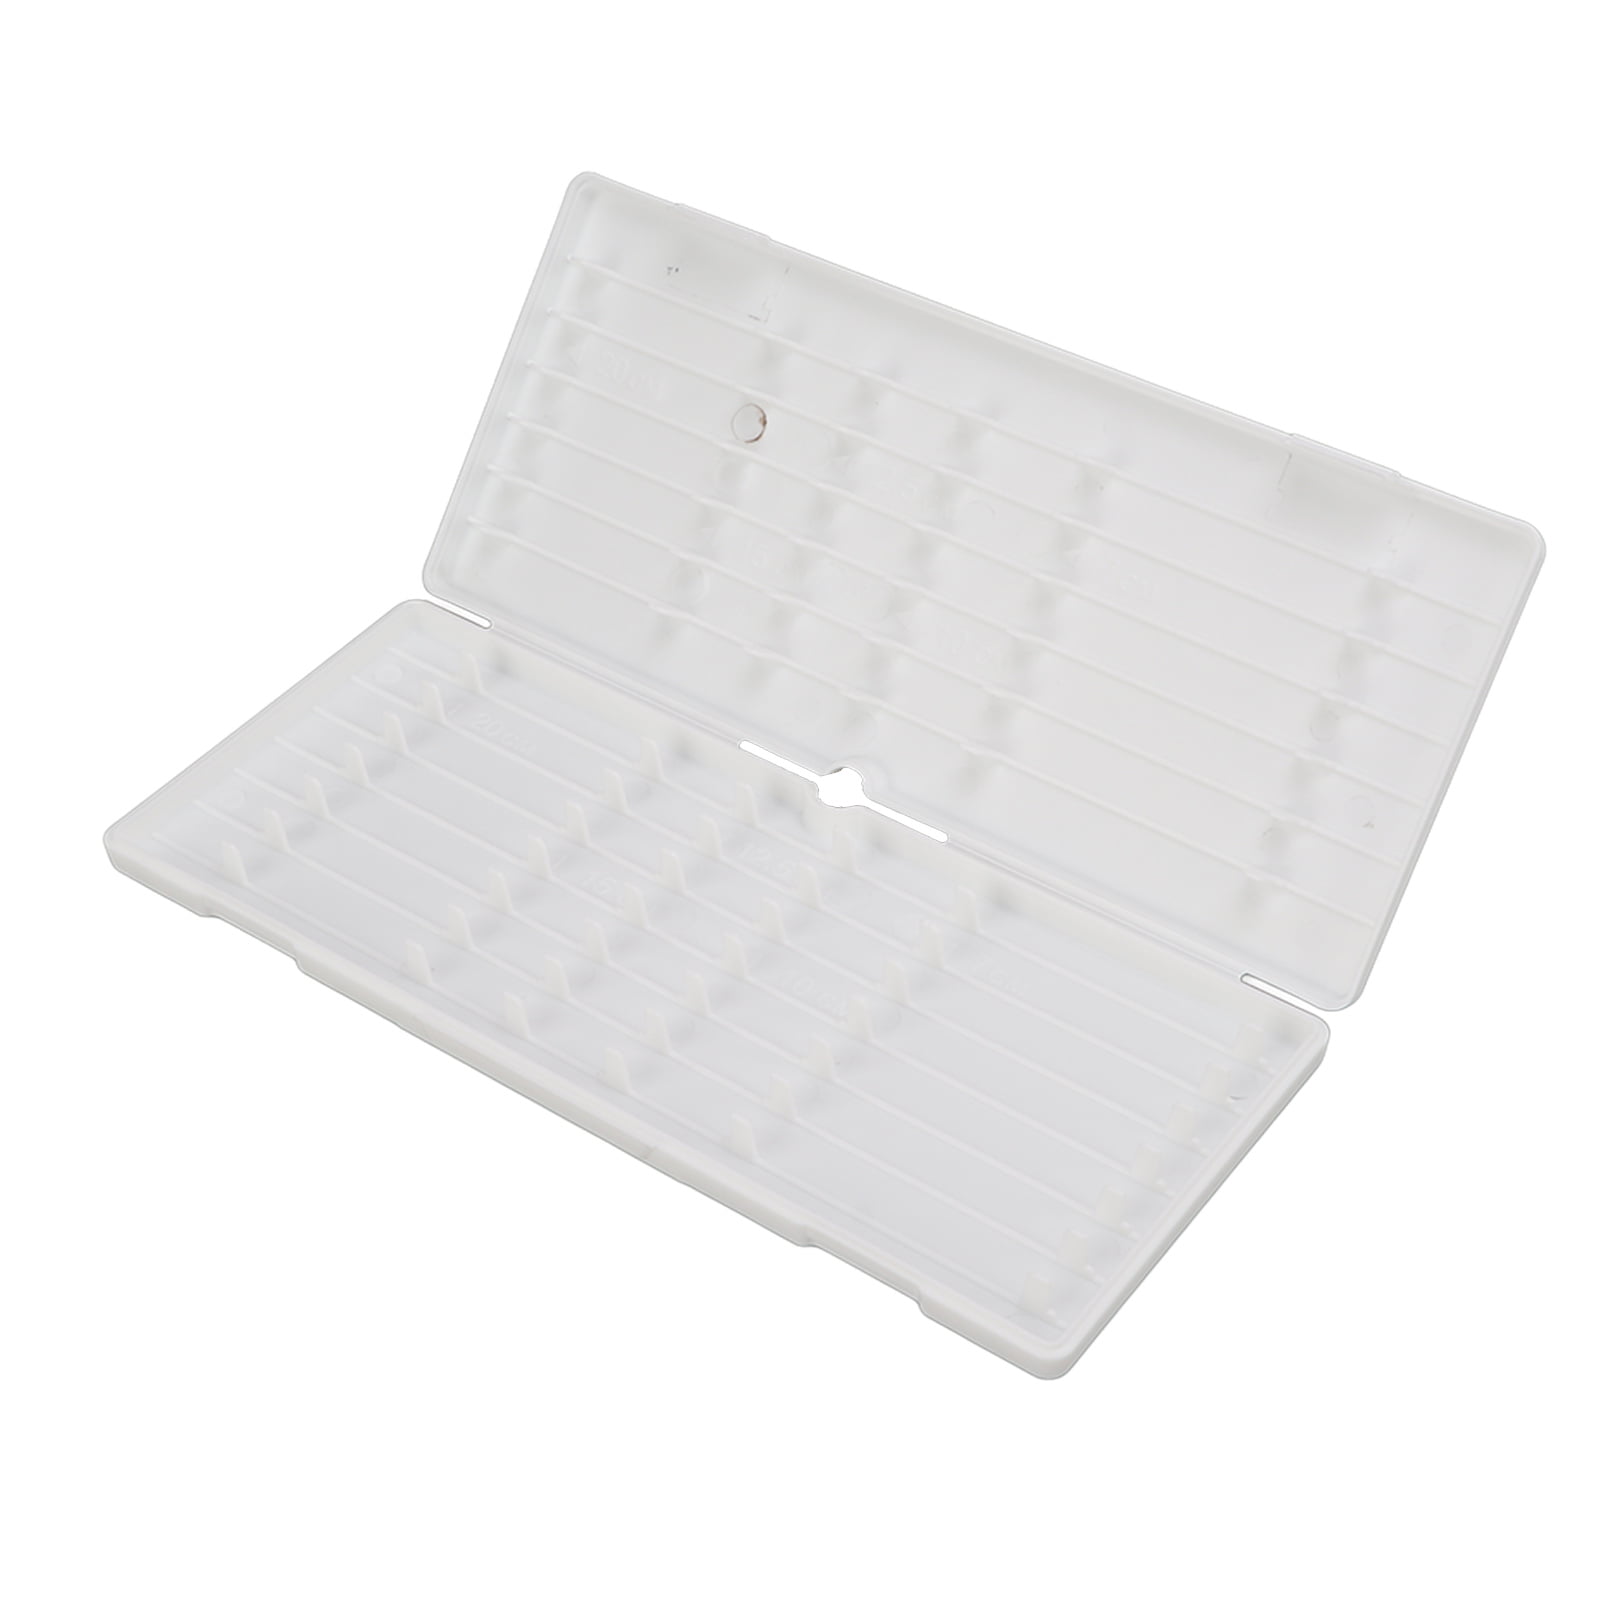 Fishing Line , Protrusion Compartments Fishing Line Storage Box For ...